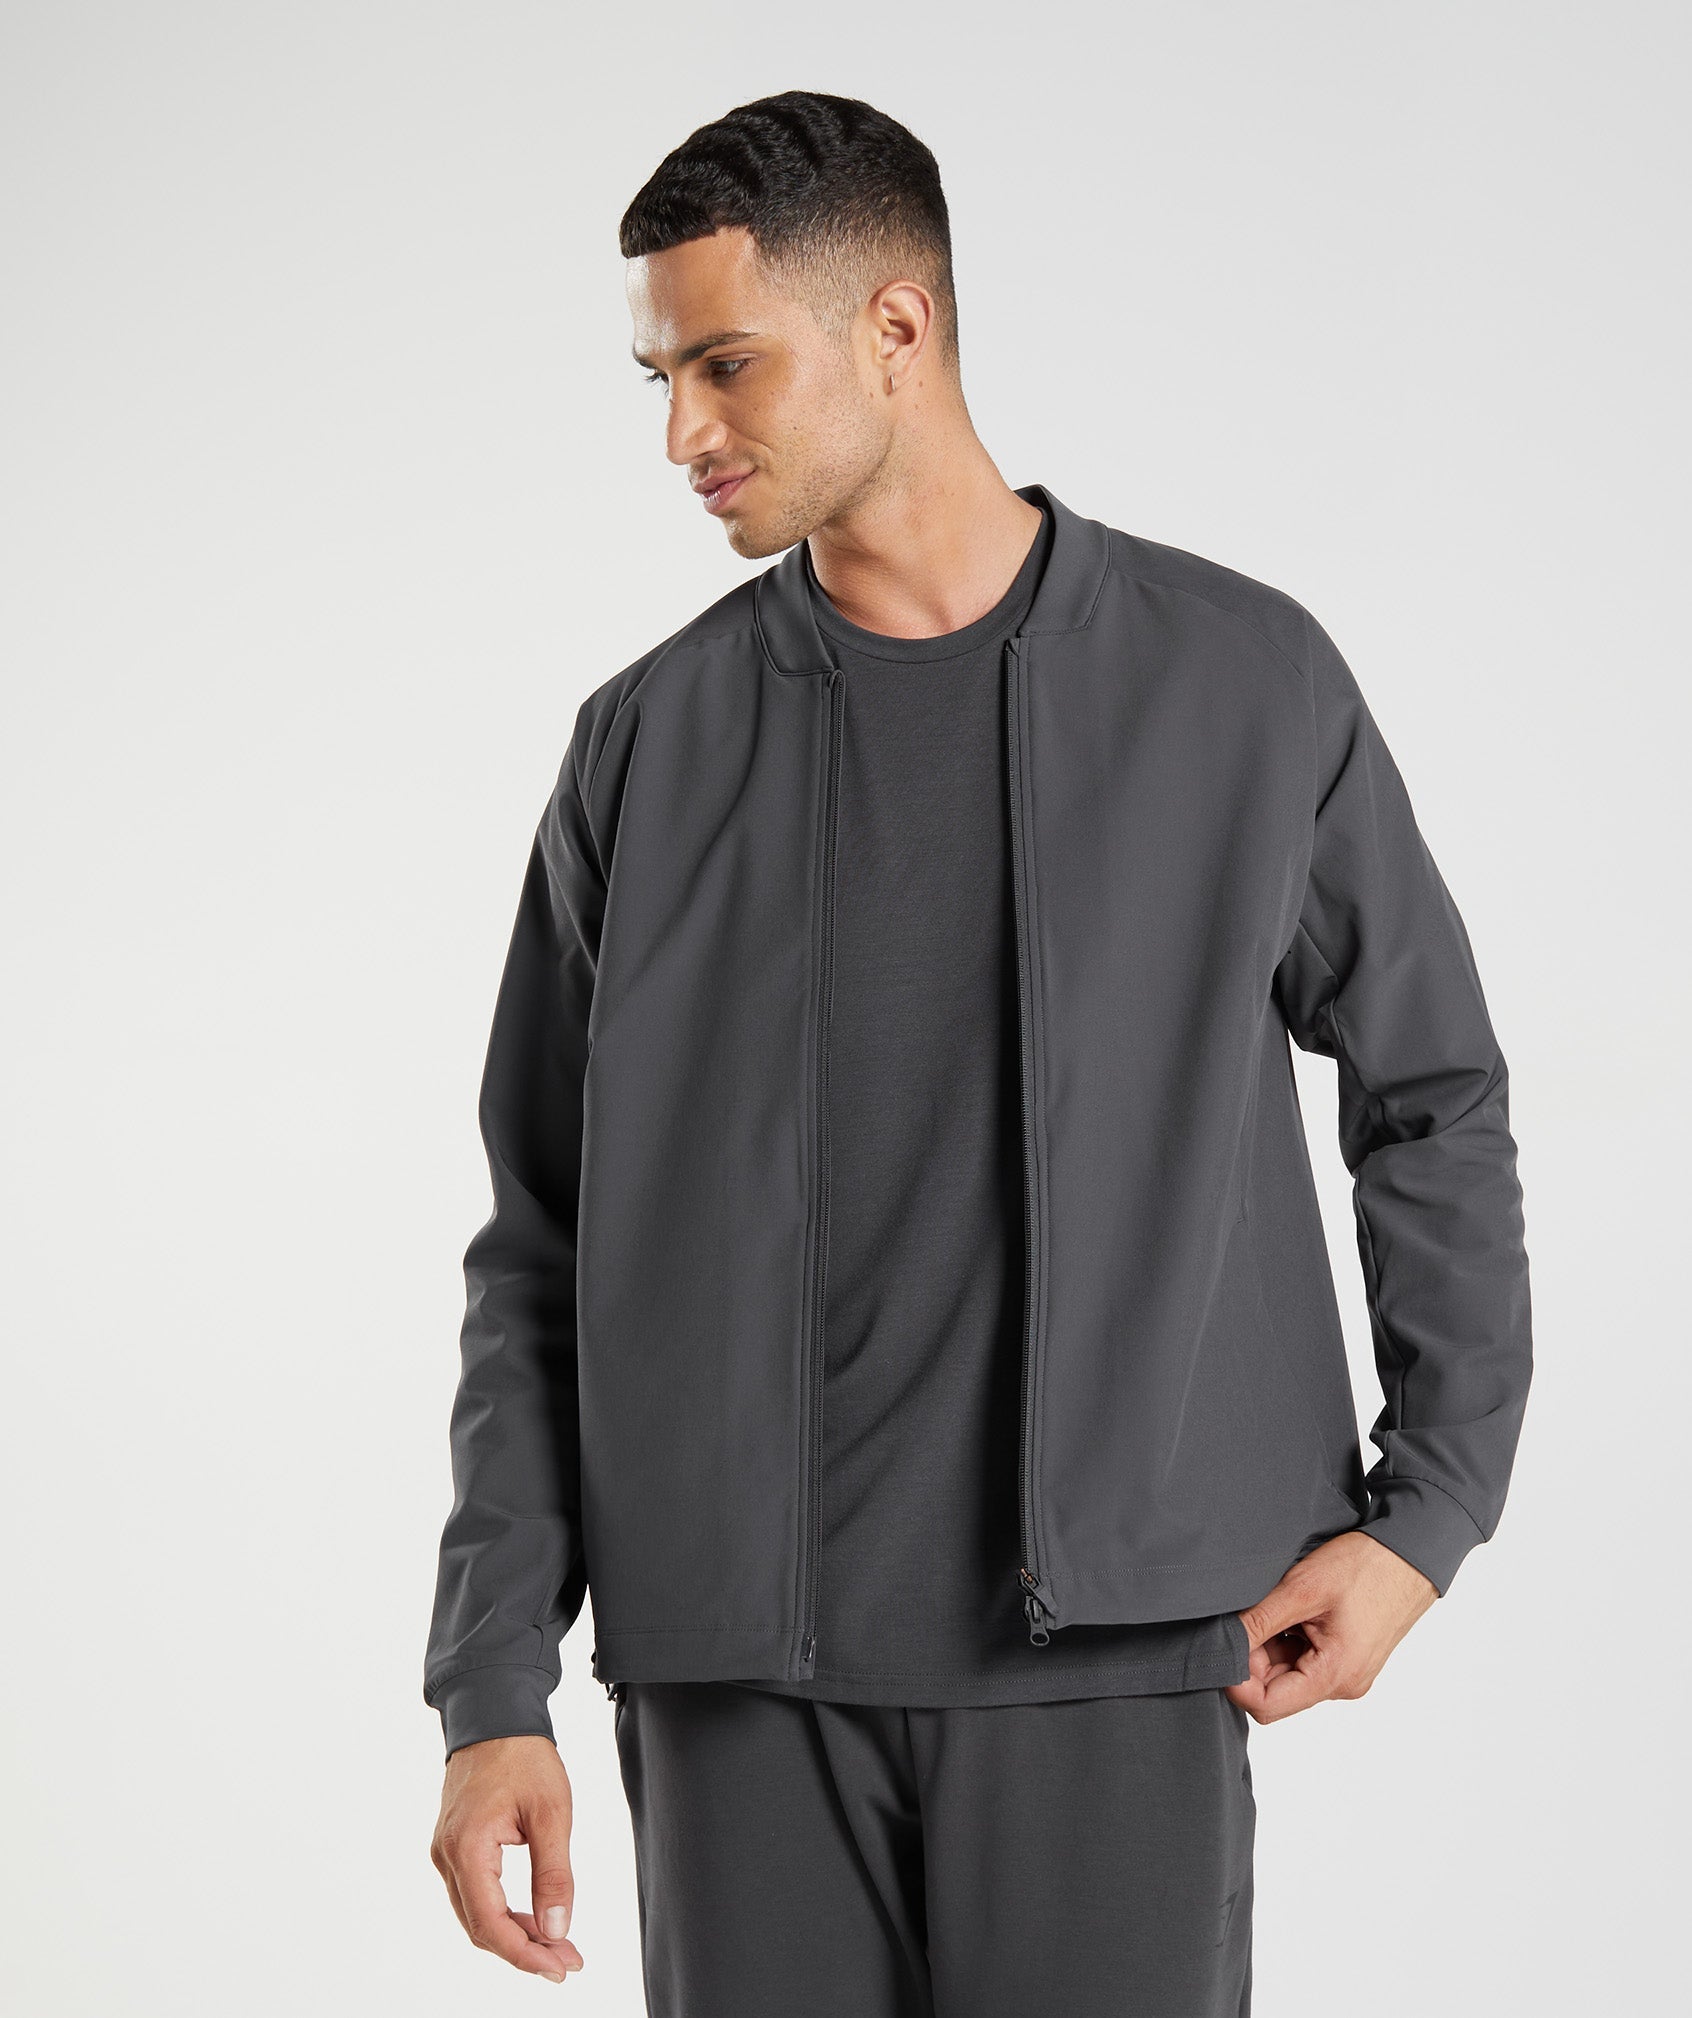 Studio Jacket in Onyx Grey is out of stock